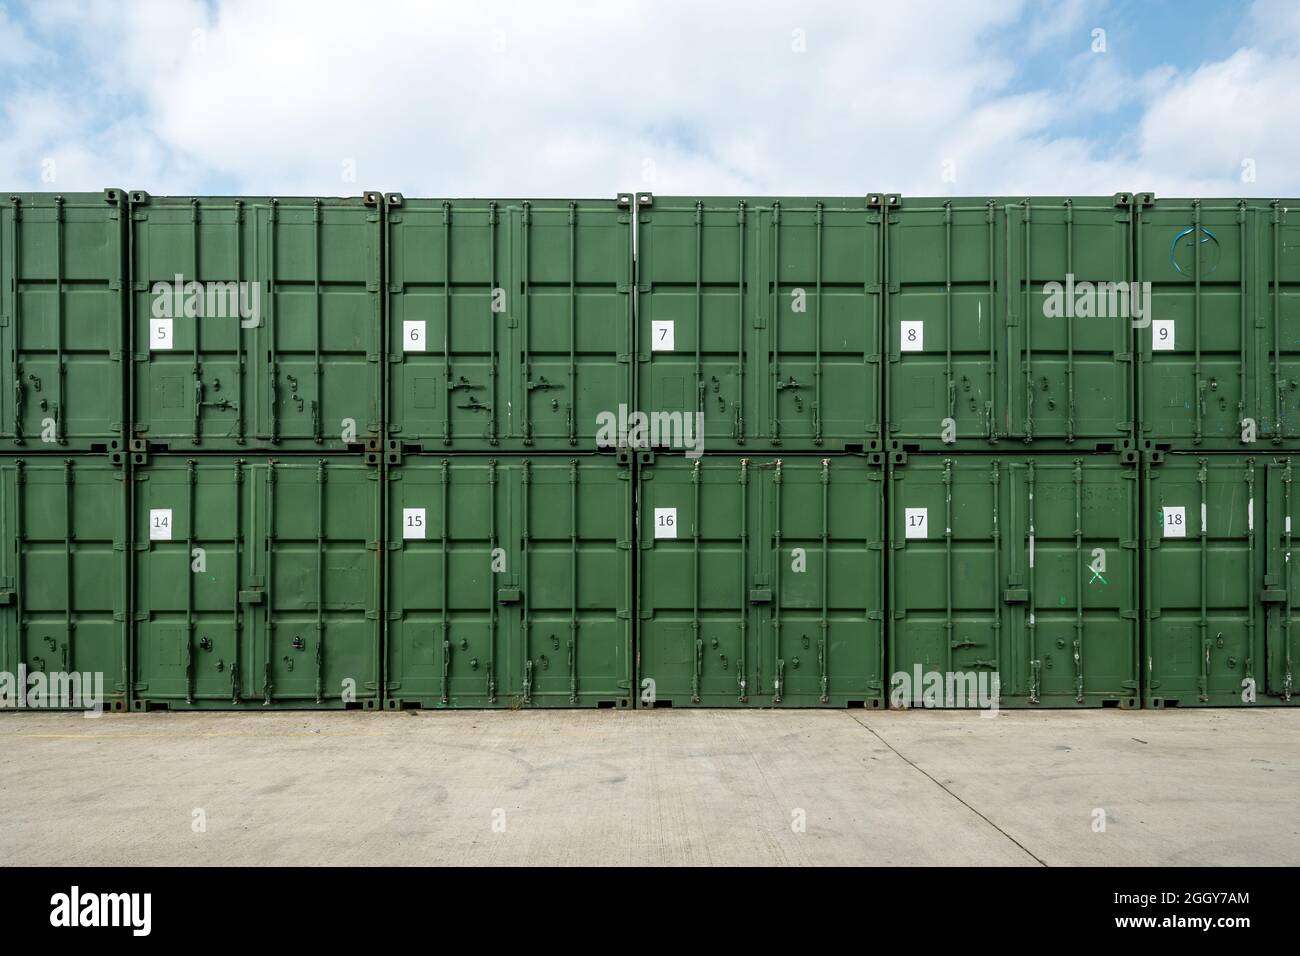 Row of storage containers, large green shipping containers stacked two high and numbered Stock Photo